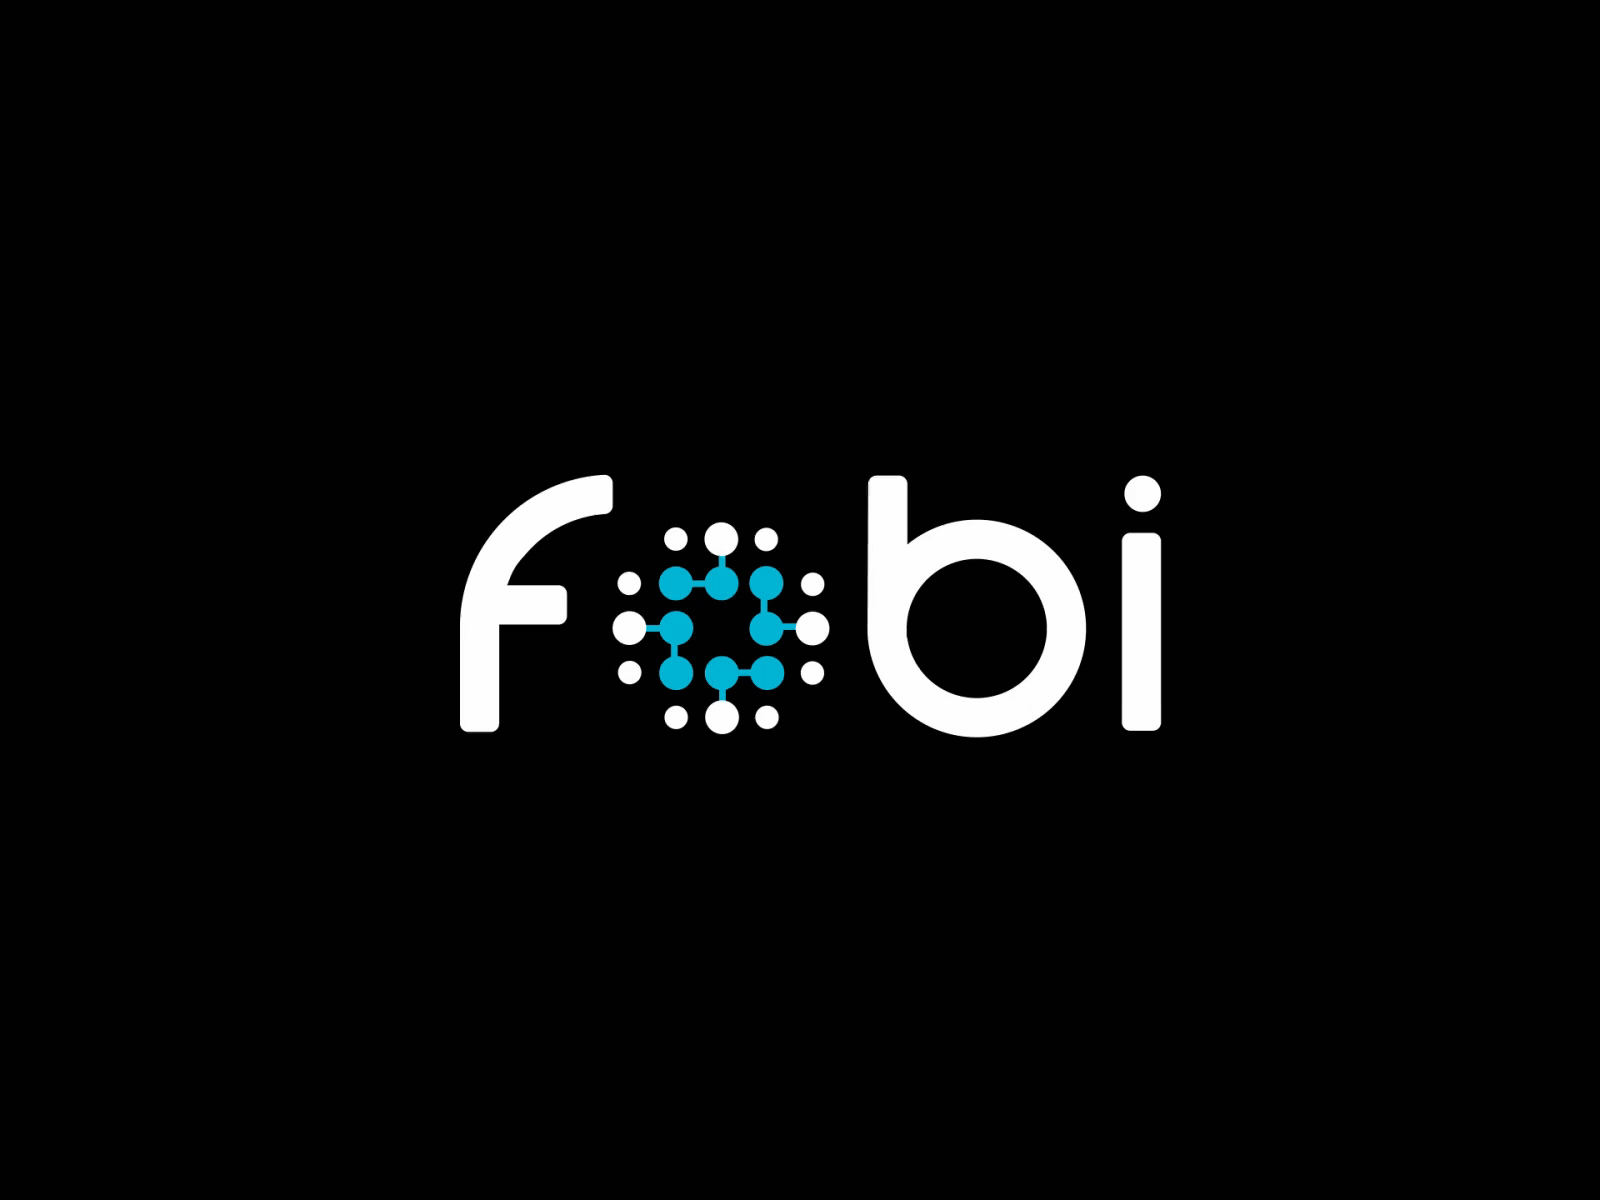 Fobi Logo Animation 2d an after effects animated logo animated logos animation animation 2d animation after effects animation design animation logo logo animated logo animation logo animations motion motion graphics